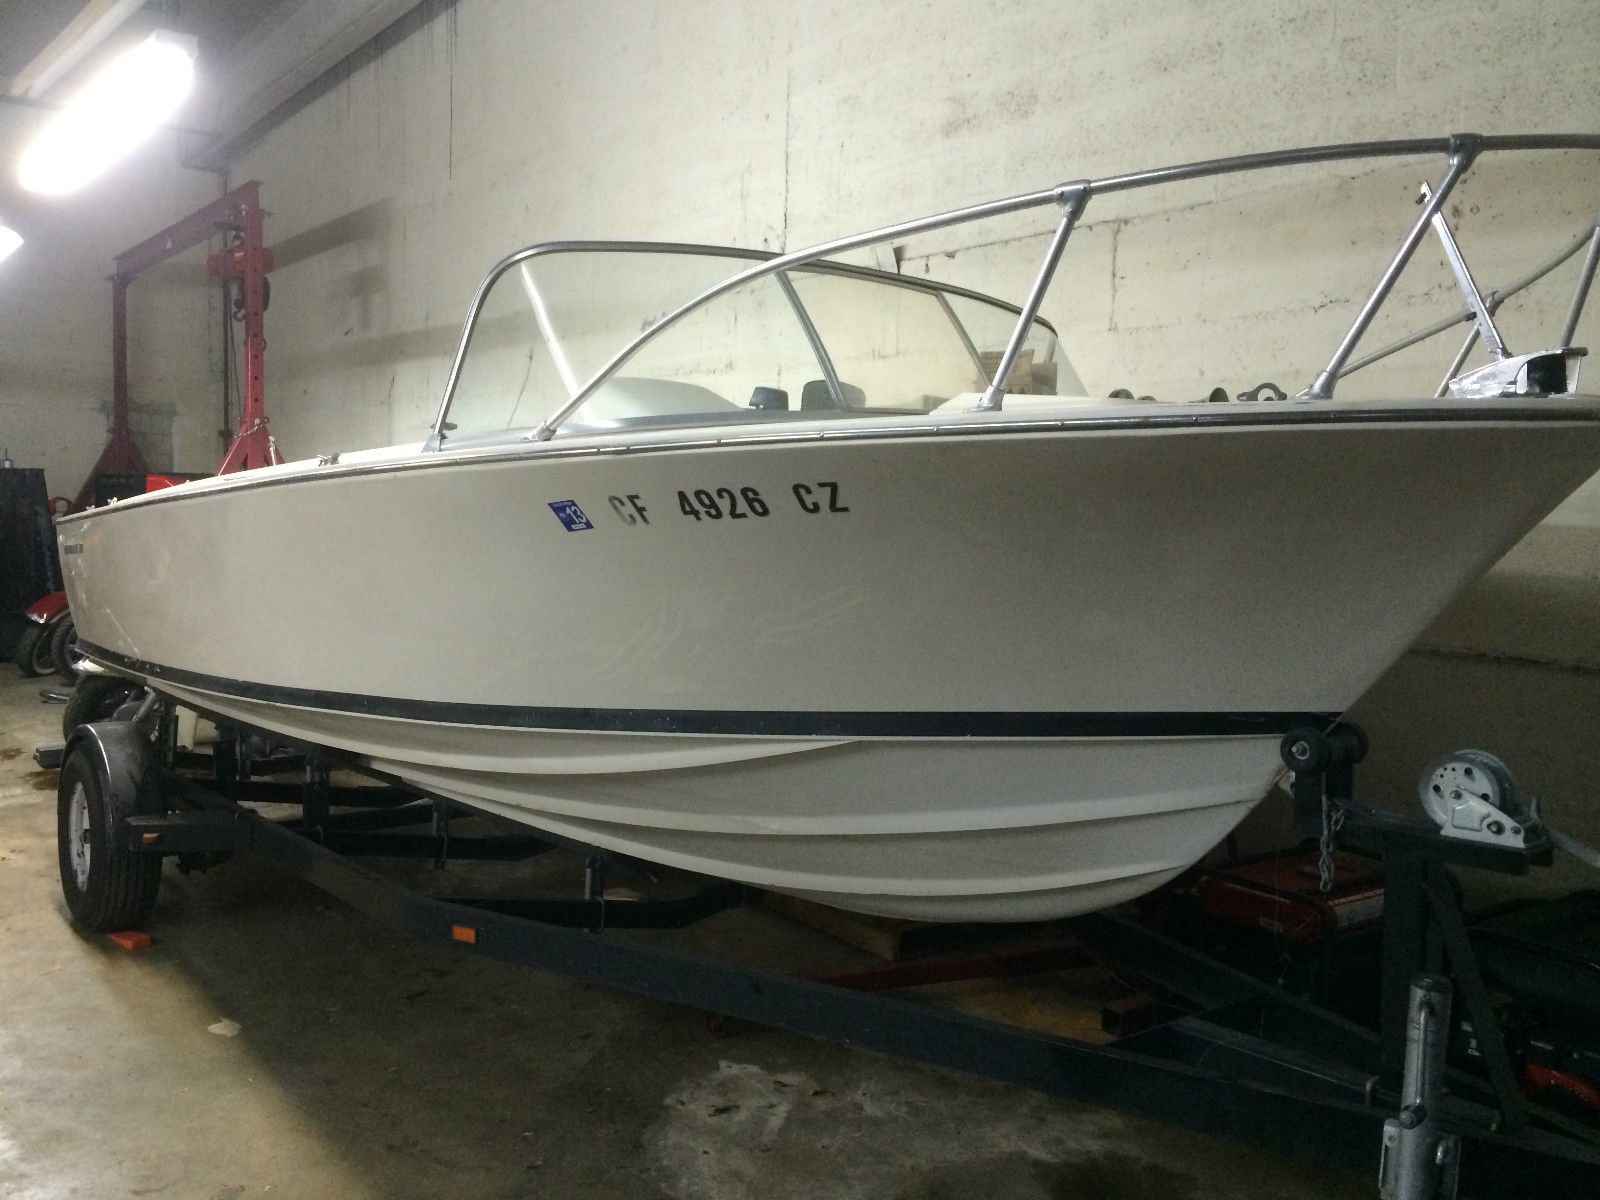 bertram 20 1965 for sale for $1,500 - boats-from-usa.com